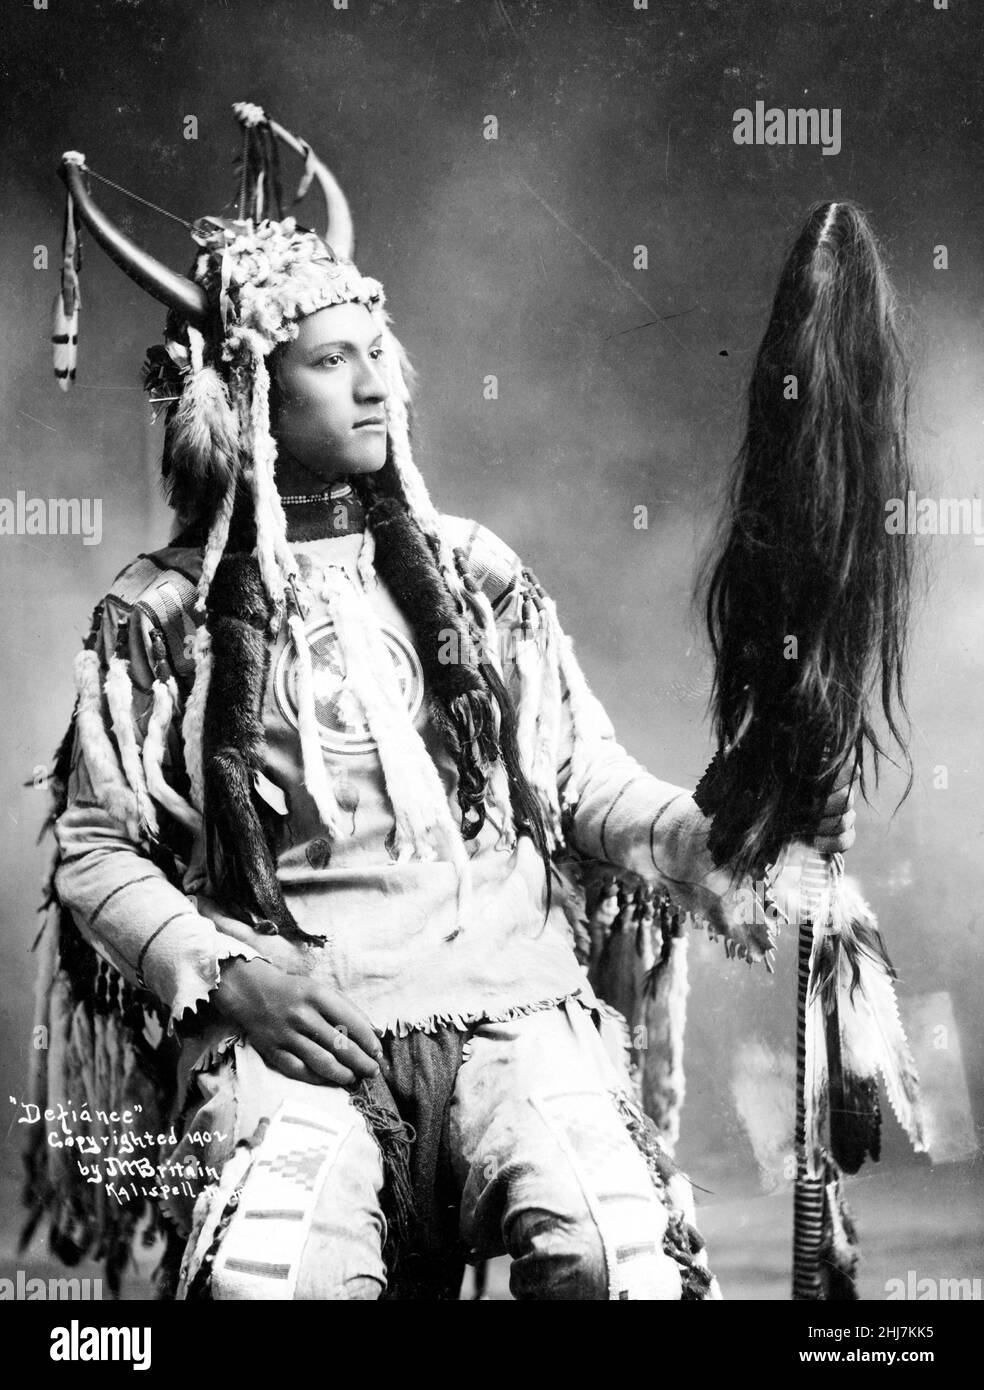 Defiance - Antique and vintage photo - Native american / Indian / American Indian. C 1902. Stock Photo